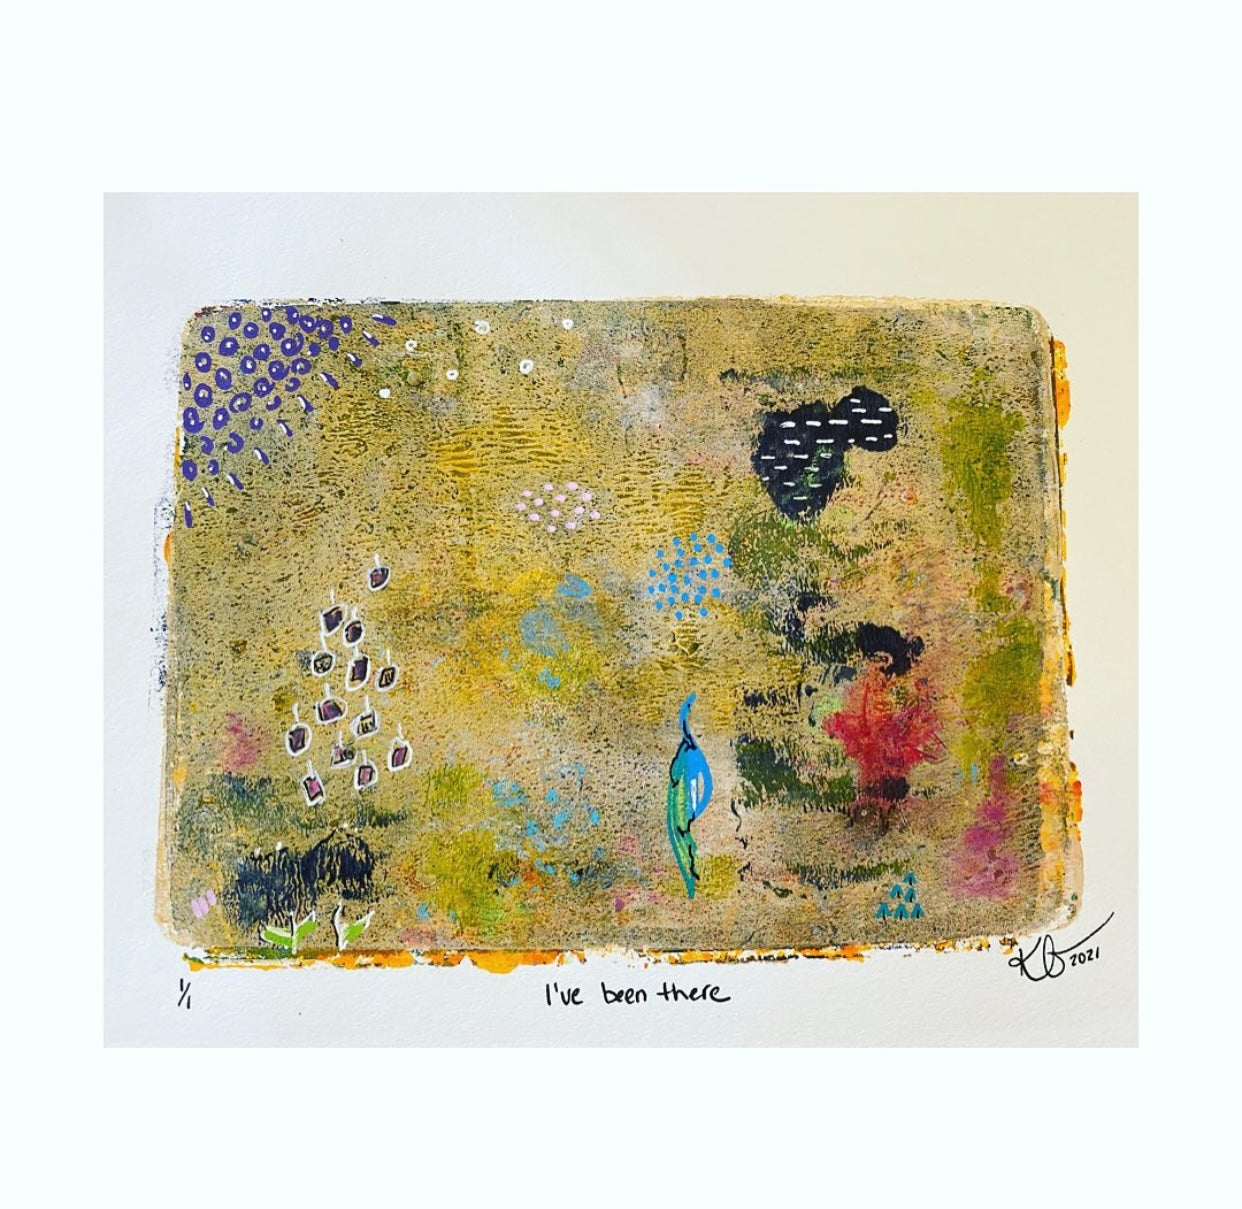 Beautiful texturey details! Golds, oranges and blues! Where have you been?  Grab it quick, if you love it, it’s today’s $45 (CAD!) offering as part of #everyonedeservesart  Acrylic, ink. Watercolour paper. 5x8 inches